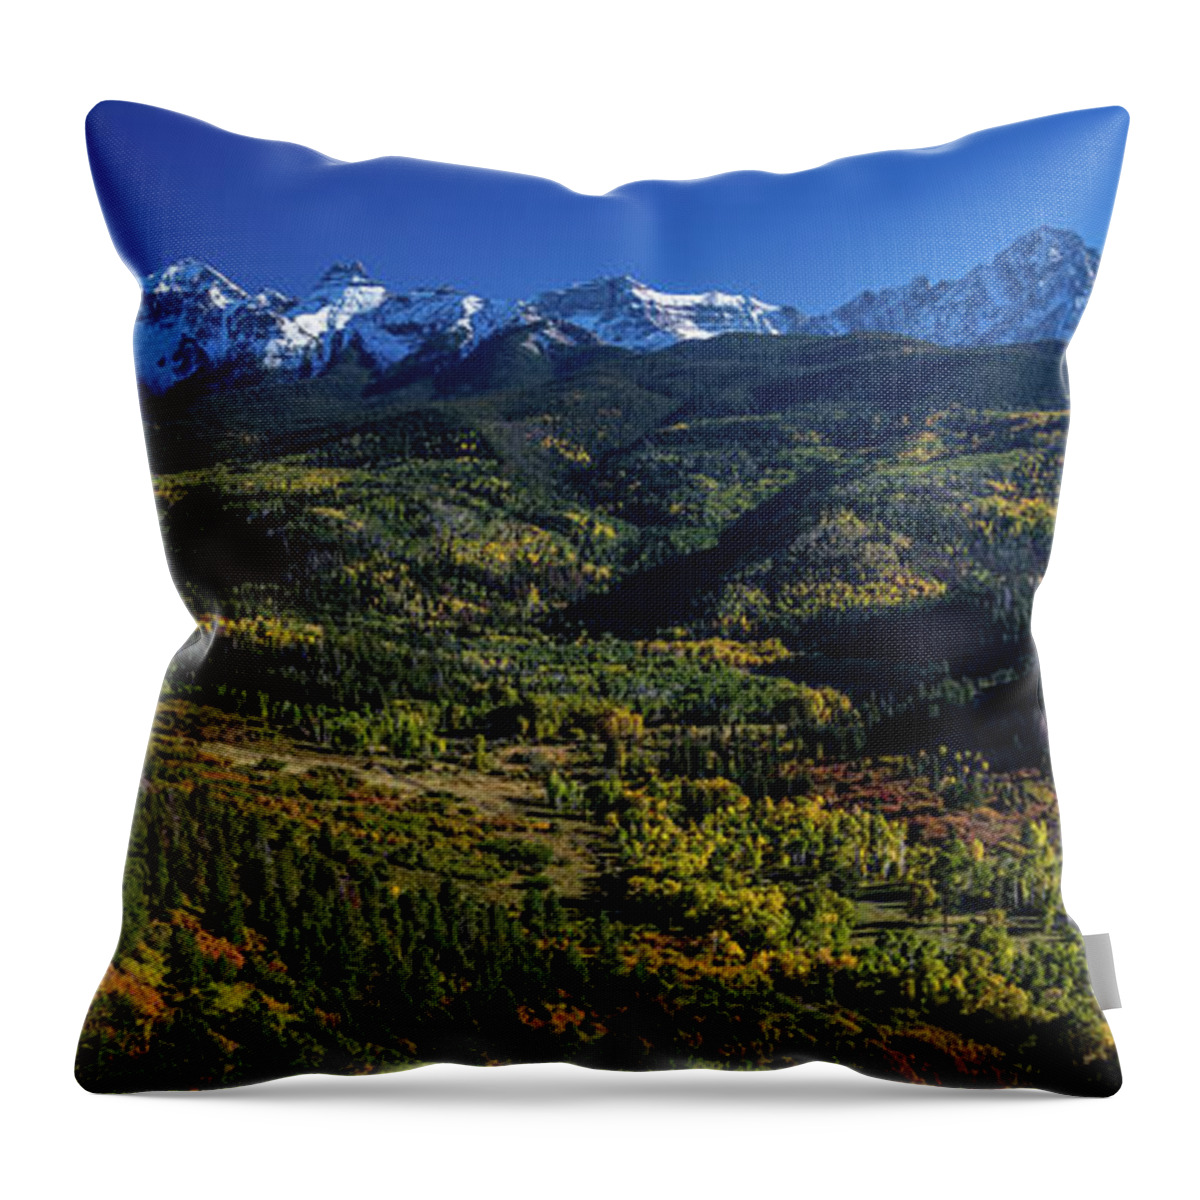 Photography Throw Pillow featuring the photograph Double Rl Ranch Near Ridgway, Colorado by Panoramic Images